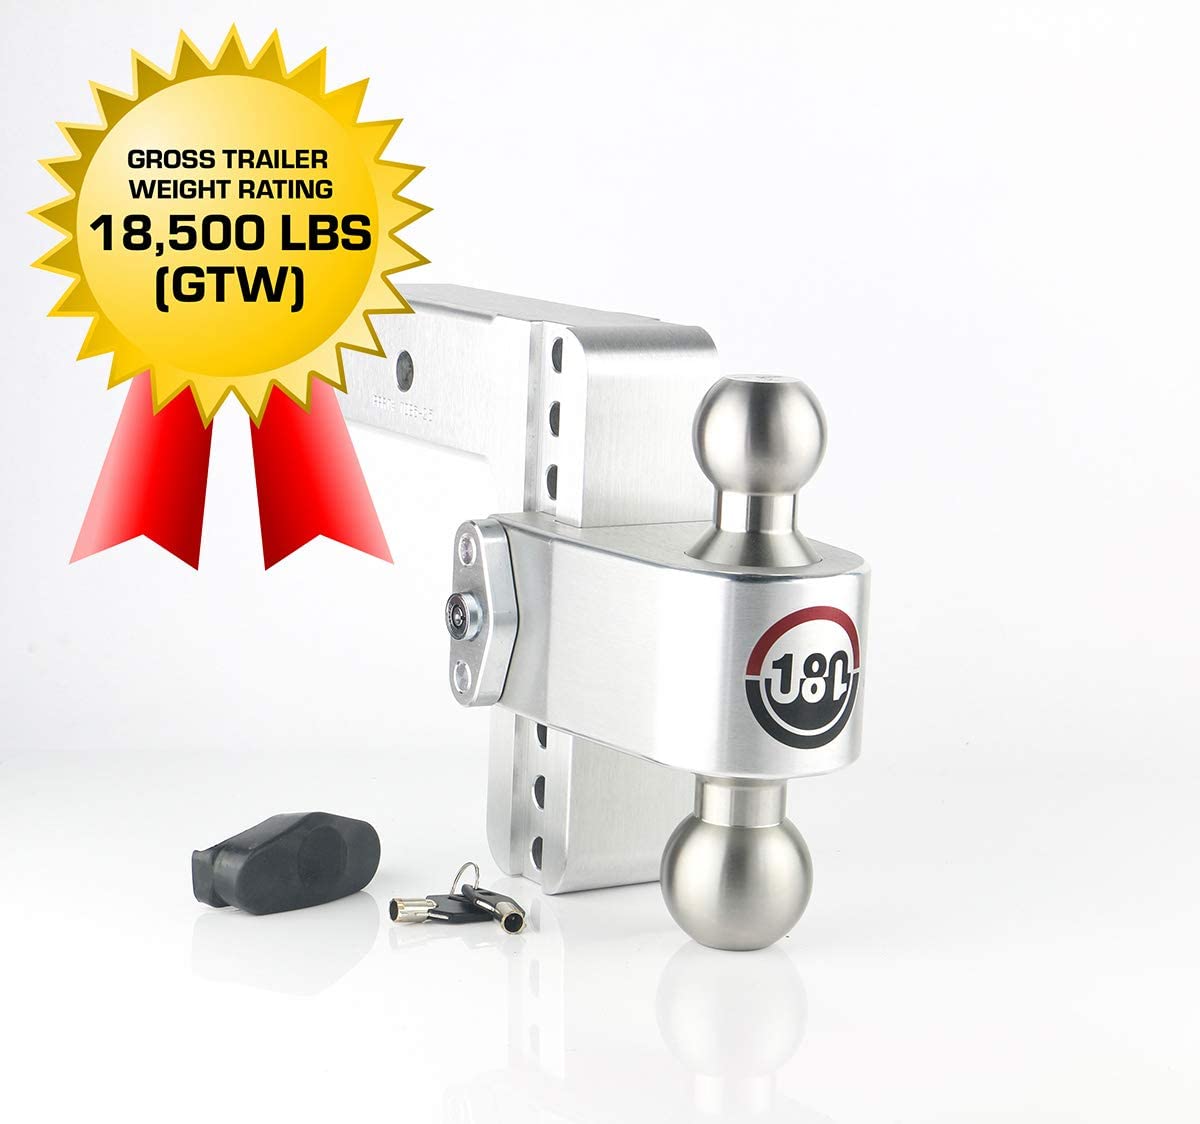 Stainless Steel Combo Ball Weigh Safe LTB6-3 2 & 2-5/16 and a Double-pin Key Lock Adjustable Aluminum Trailer Hitch & Ball Mount 6 Drop 180 Hitch w/3 Shank/Shaft 